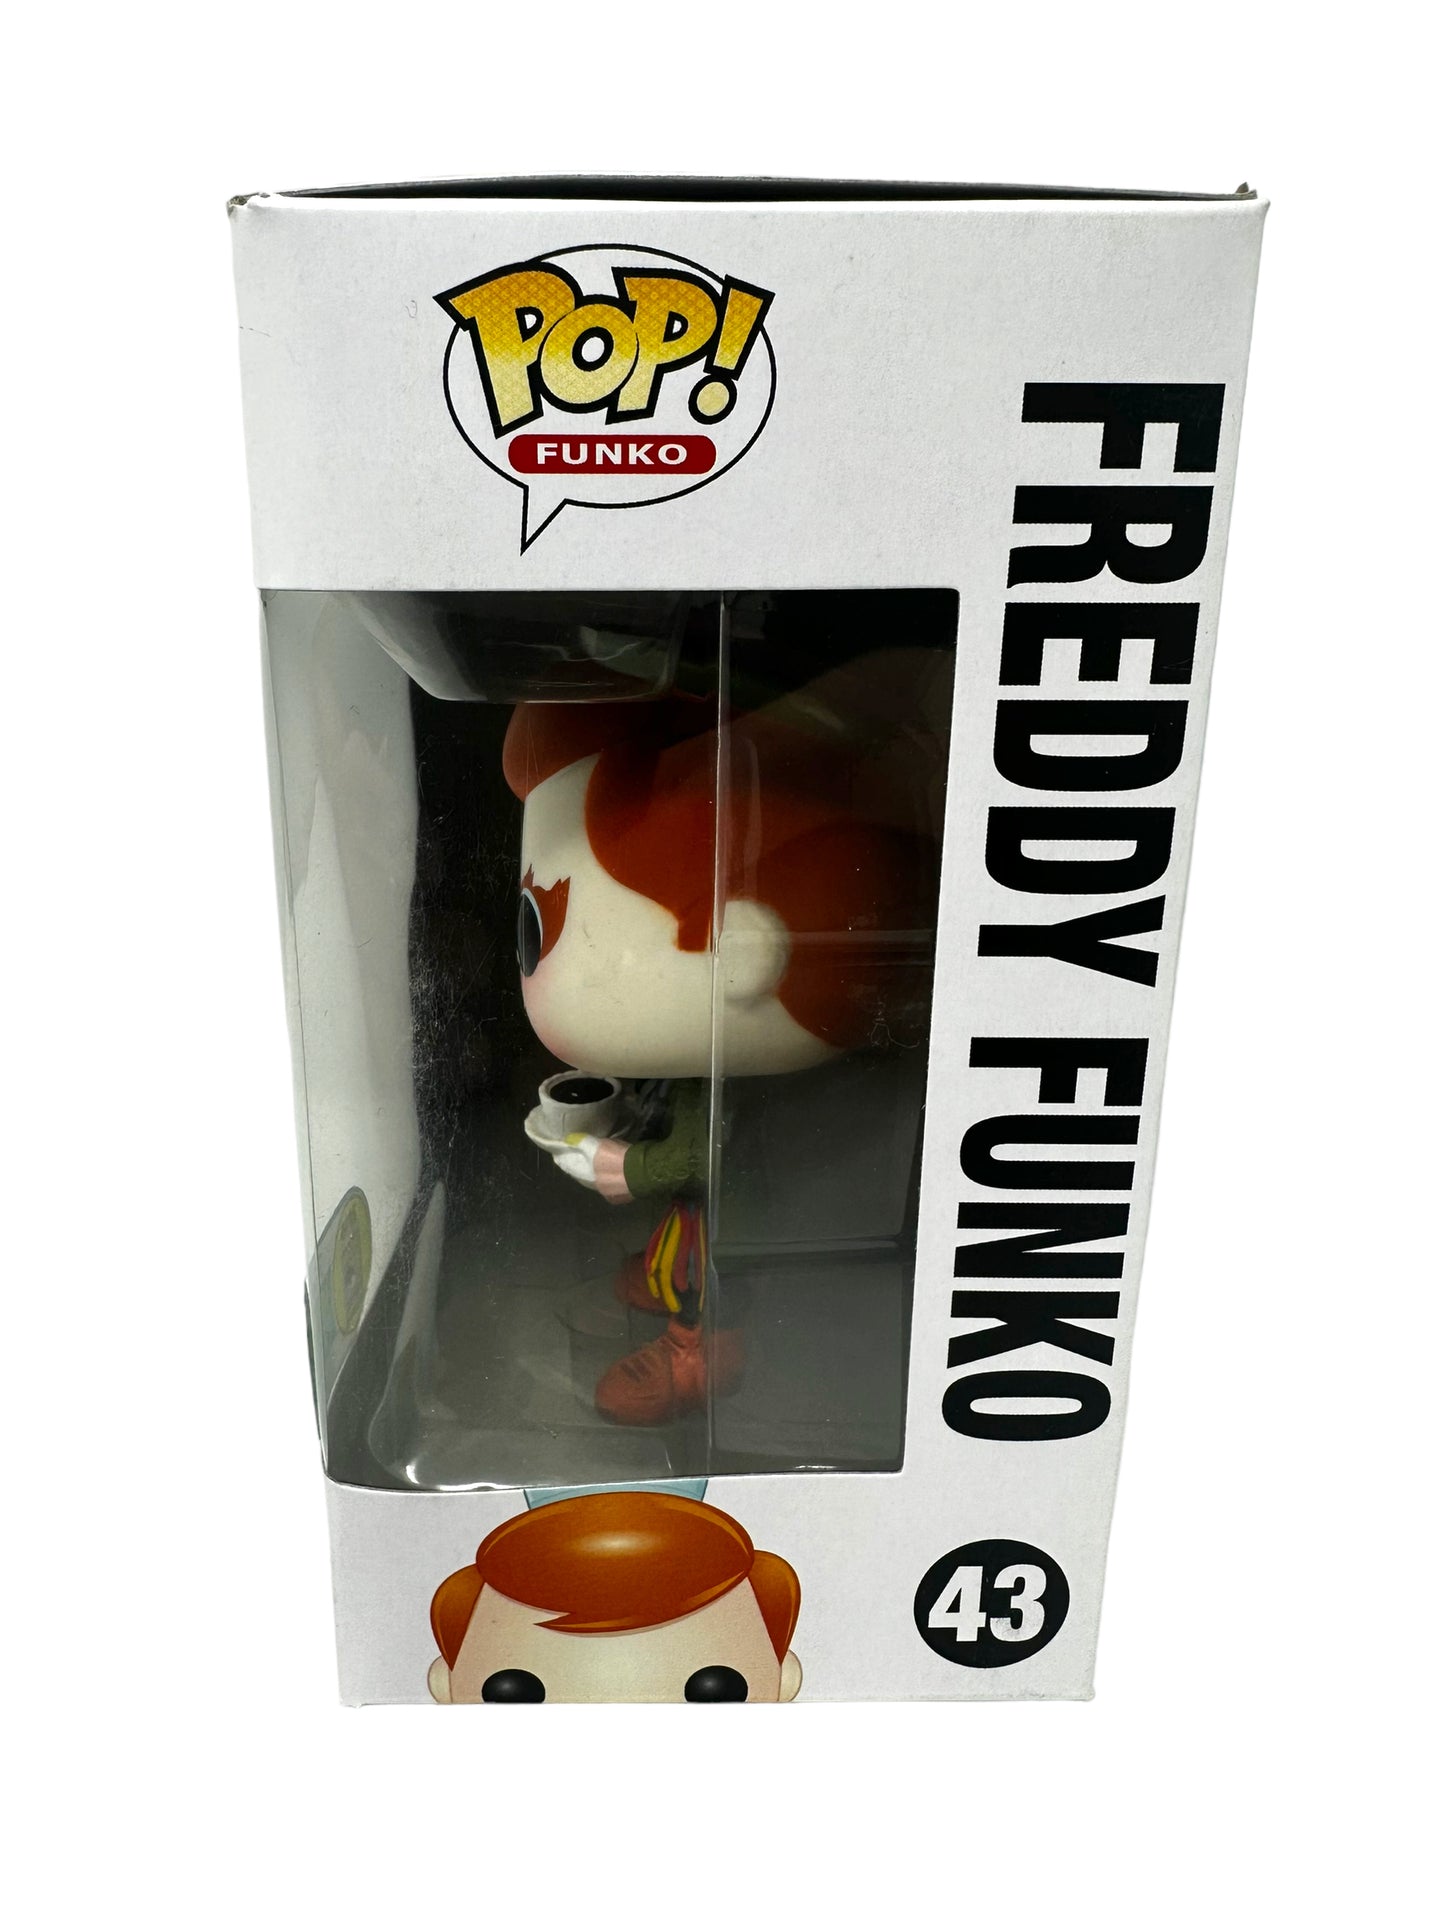 Sold - 2016 SDCC Freddy Funko as Mad Hatter w/ Chronosphere LE400